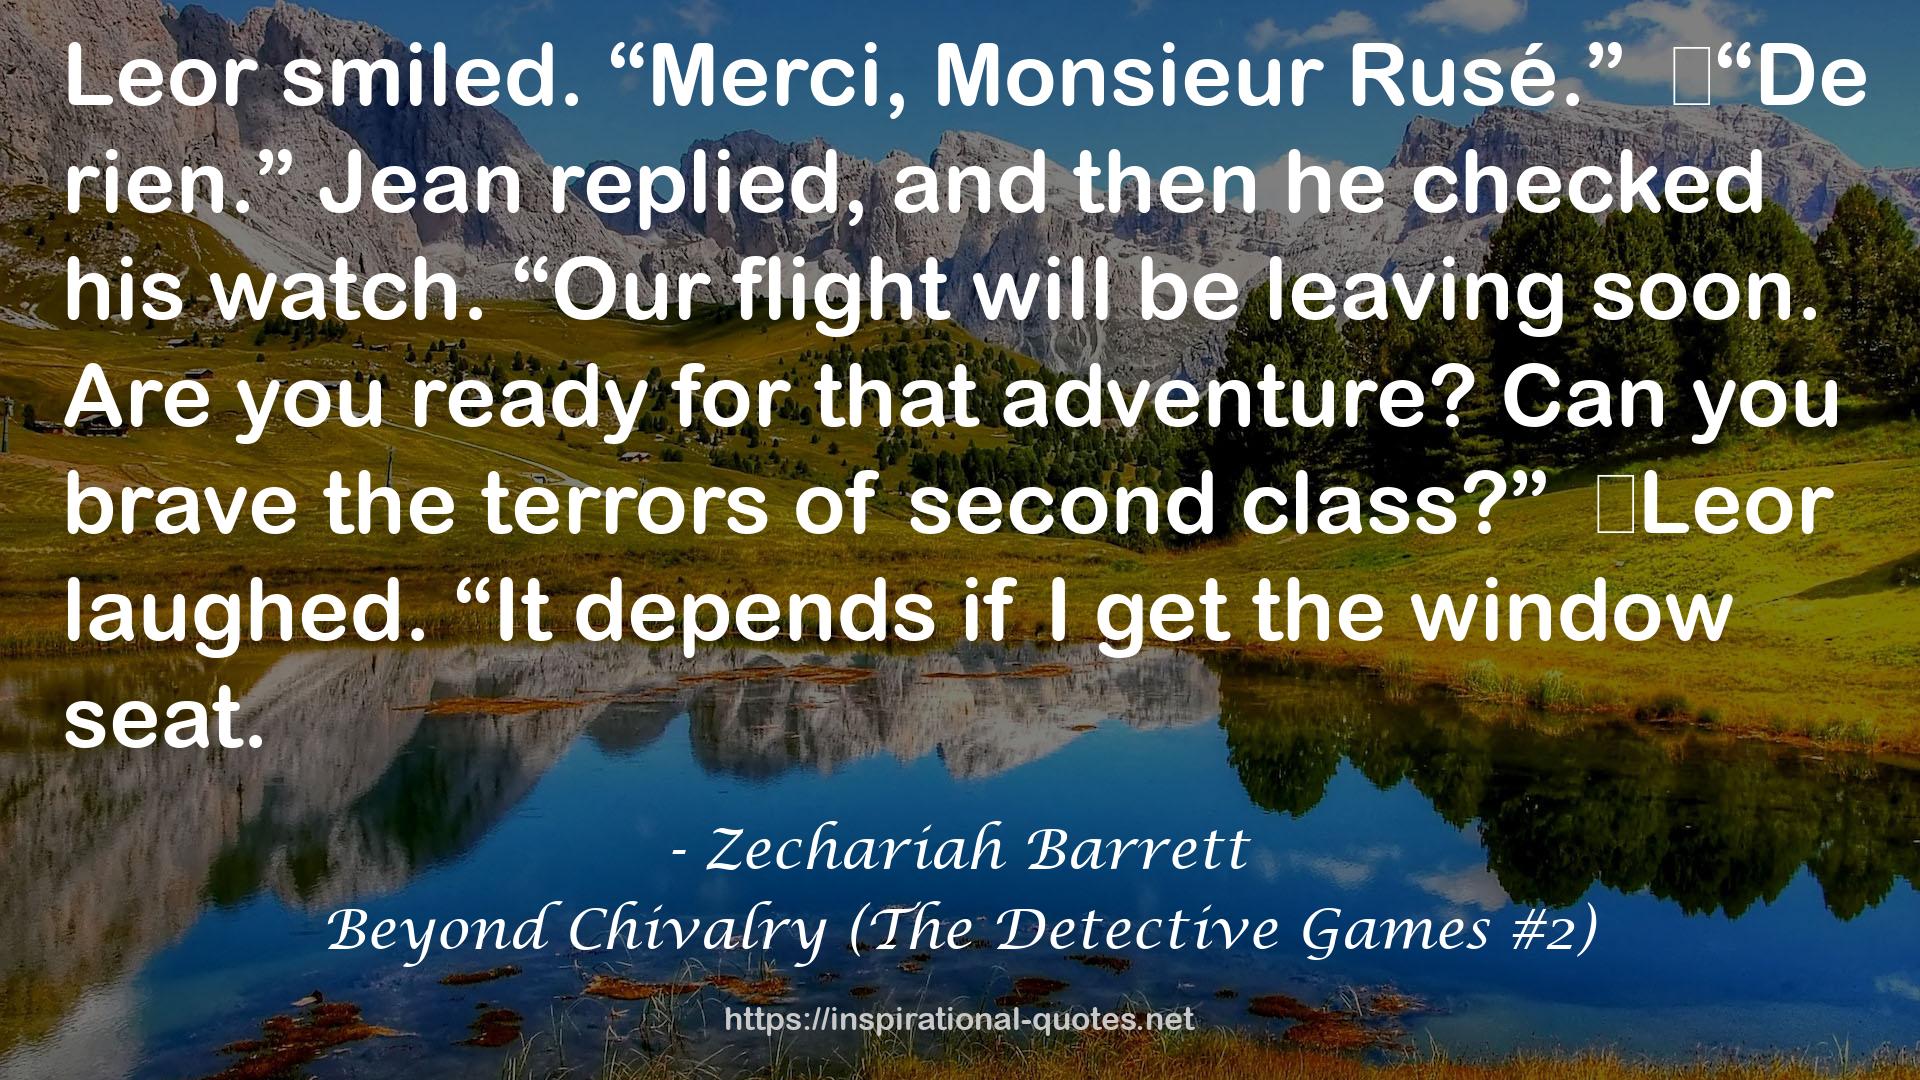 Beyond Chivalry (The Detective Games #2) QUOTES